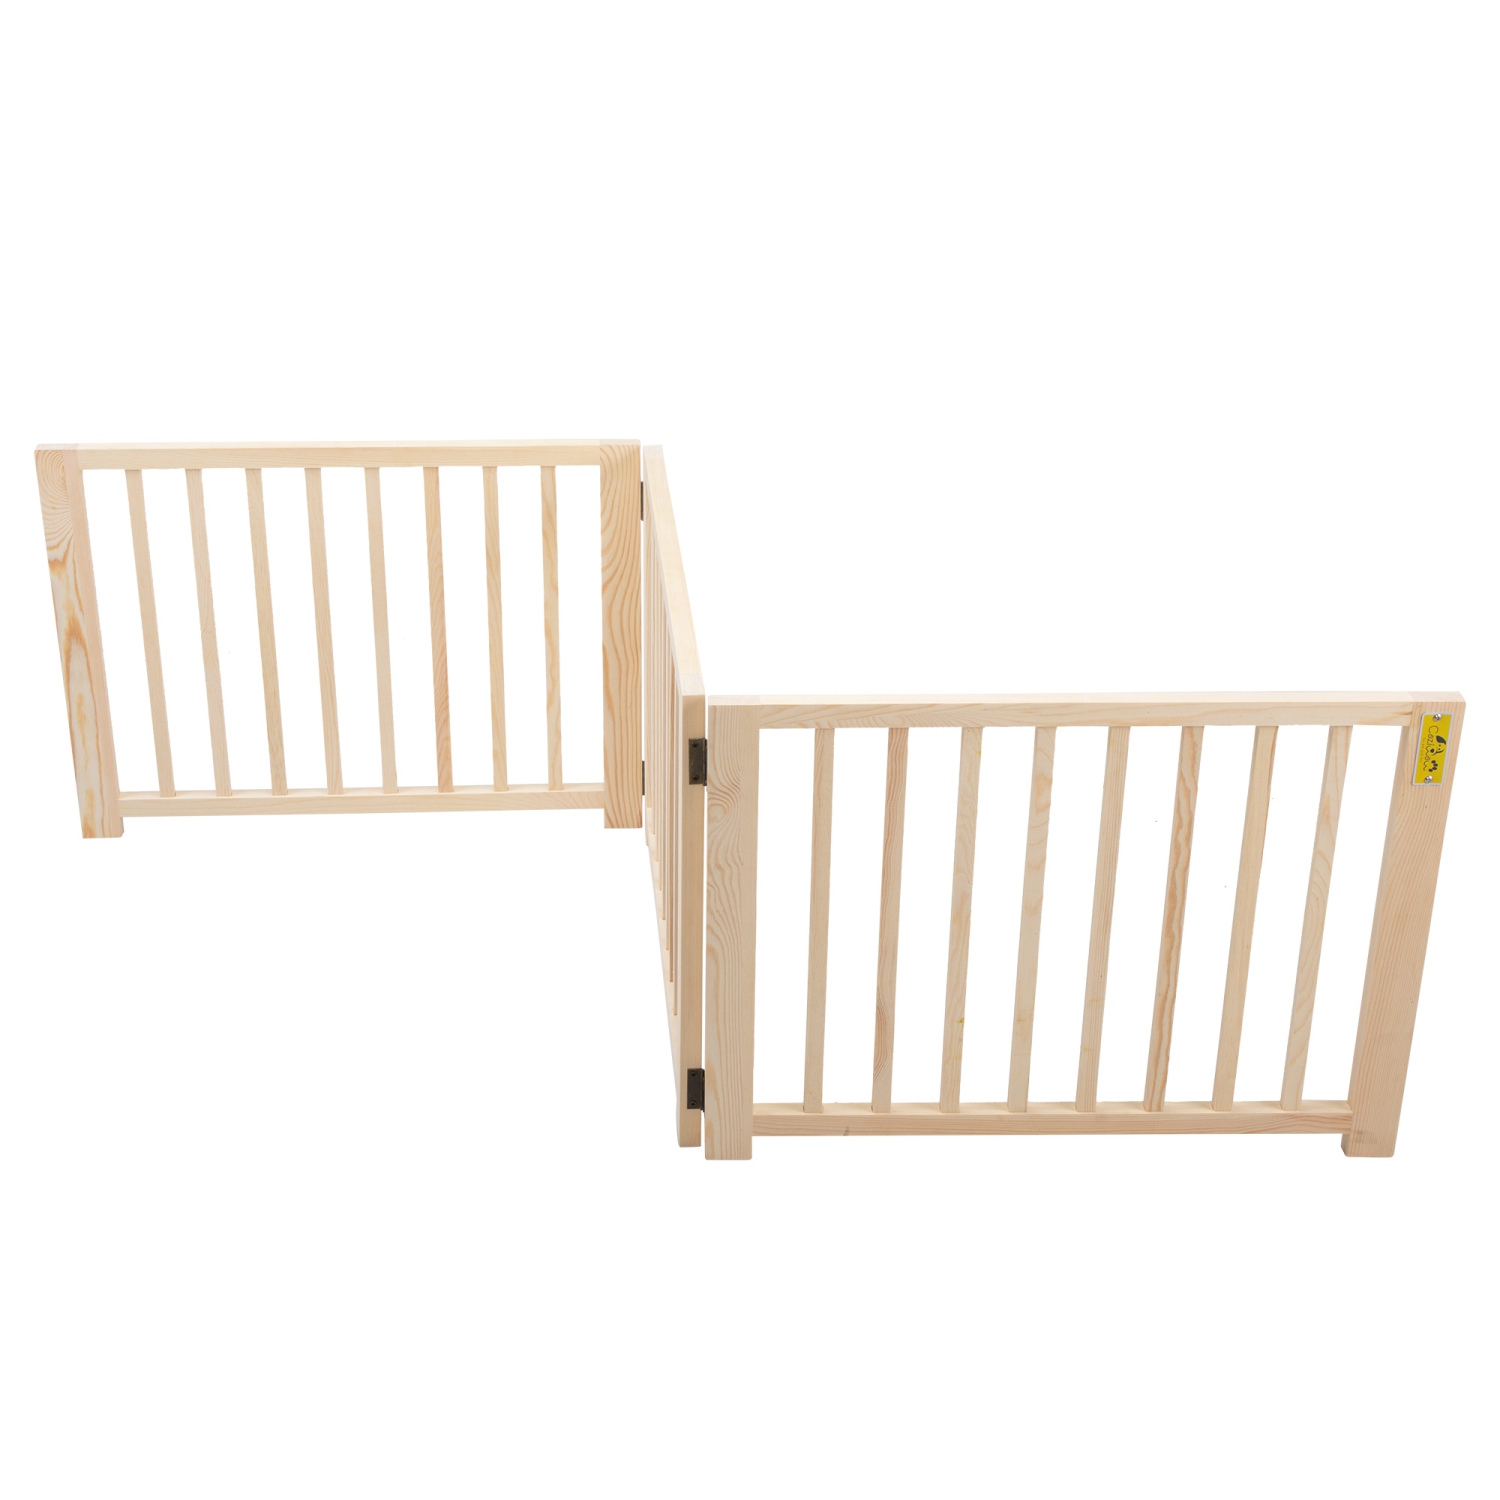 Four Paws 3 Panel Free Standing Walk Over Wooden Dog Gate 24-68 W by 17 H 